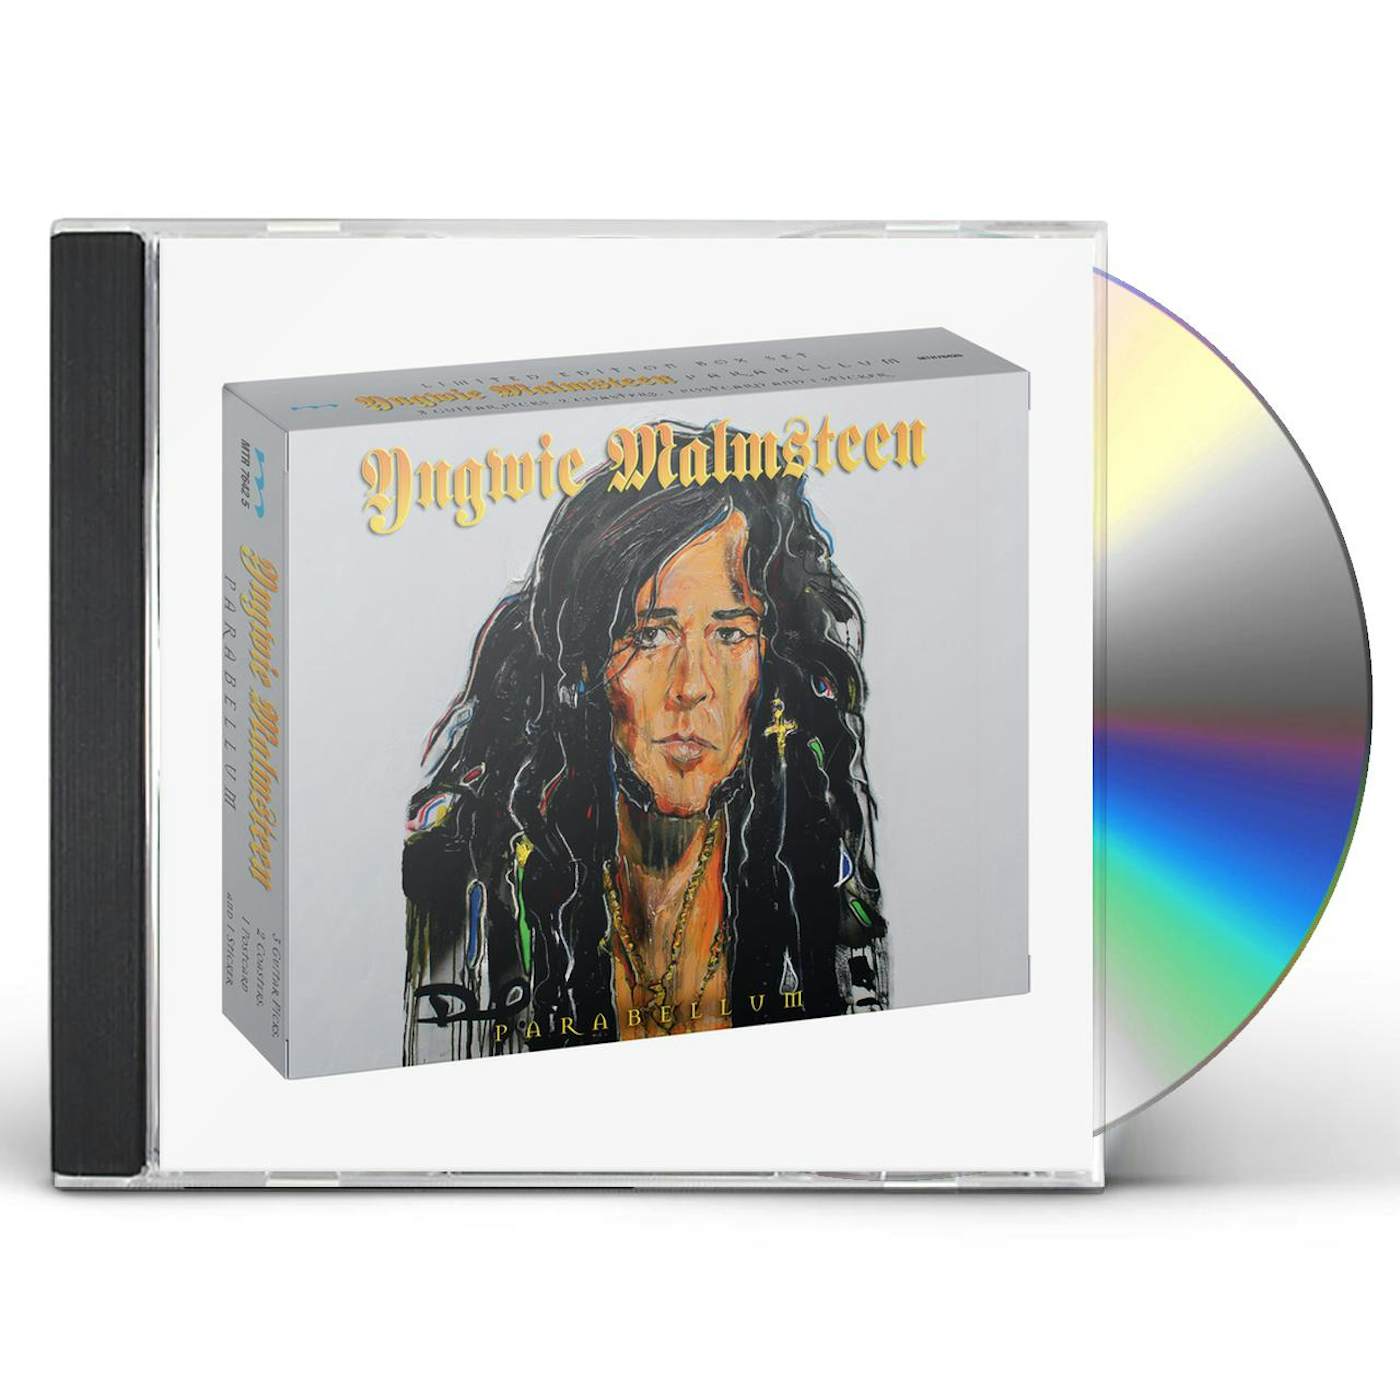 Yngwie Malmsteen PARABELLUM (DELUXE EDITION) CD